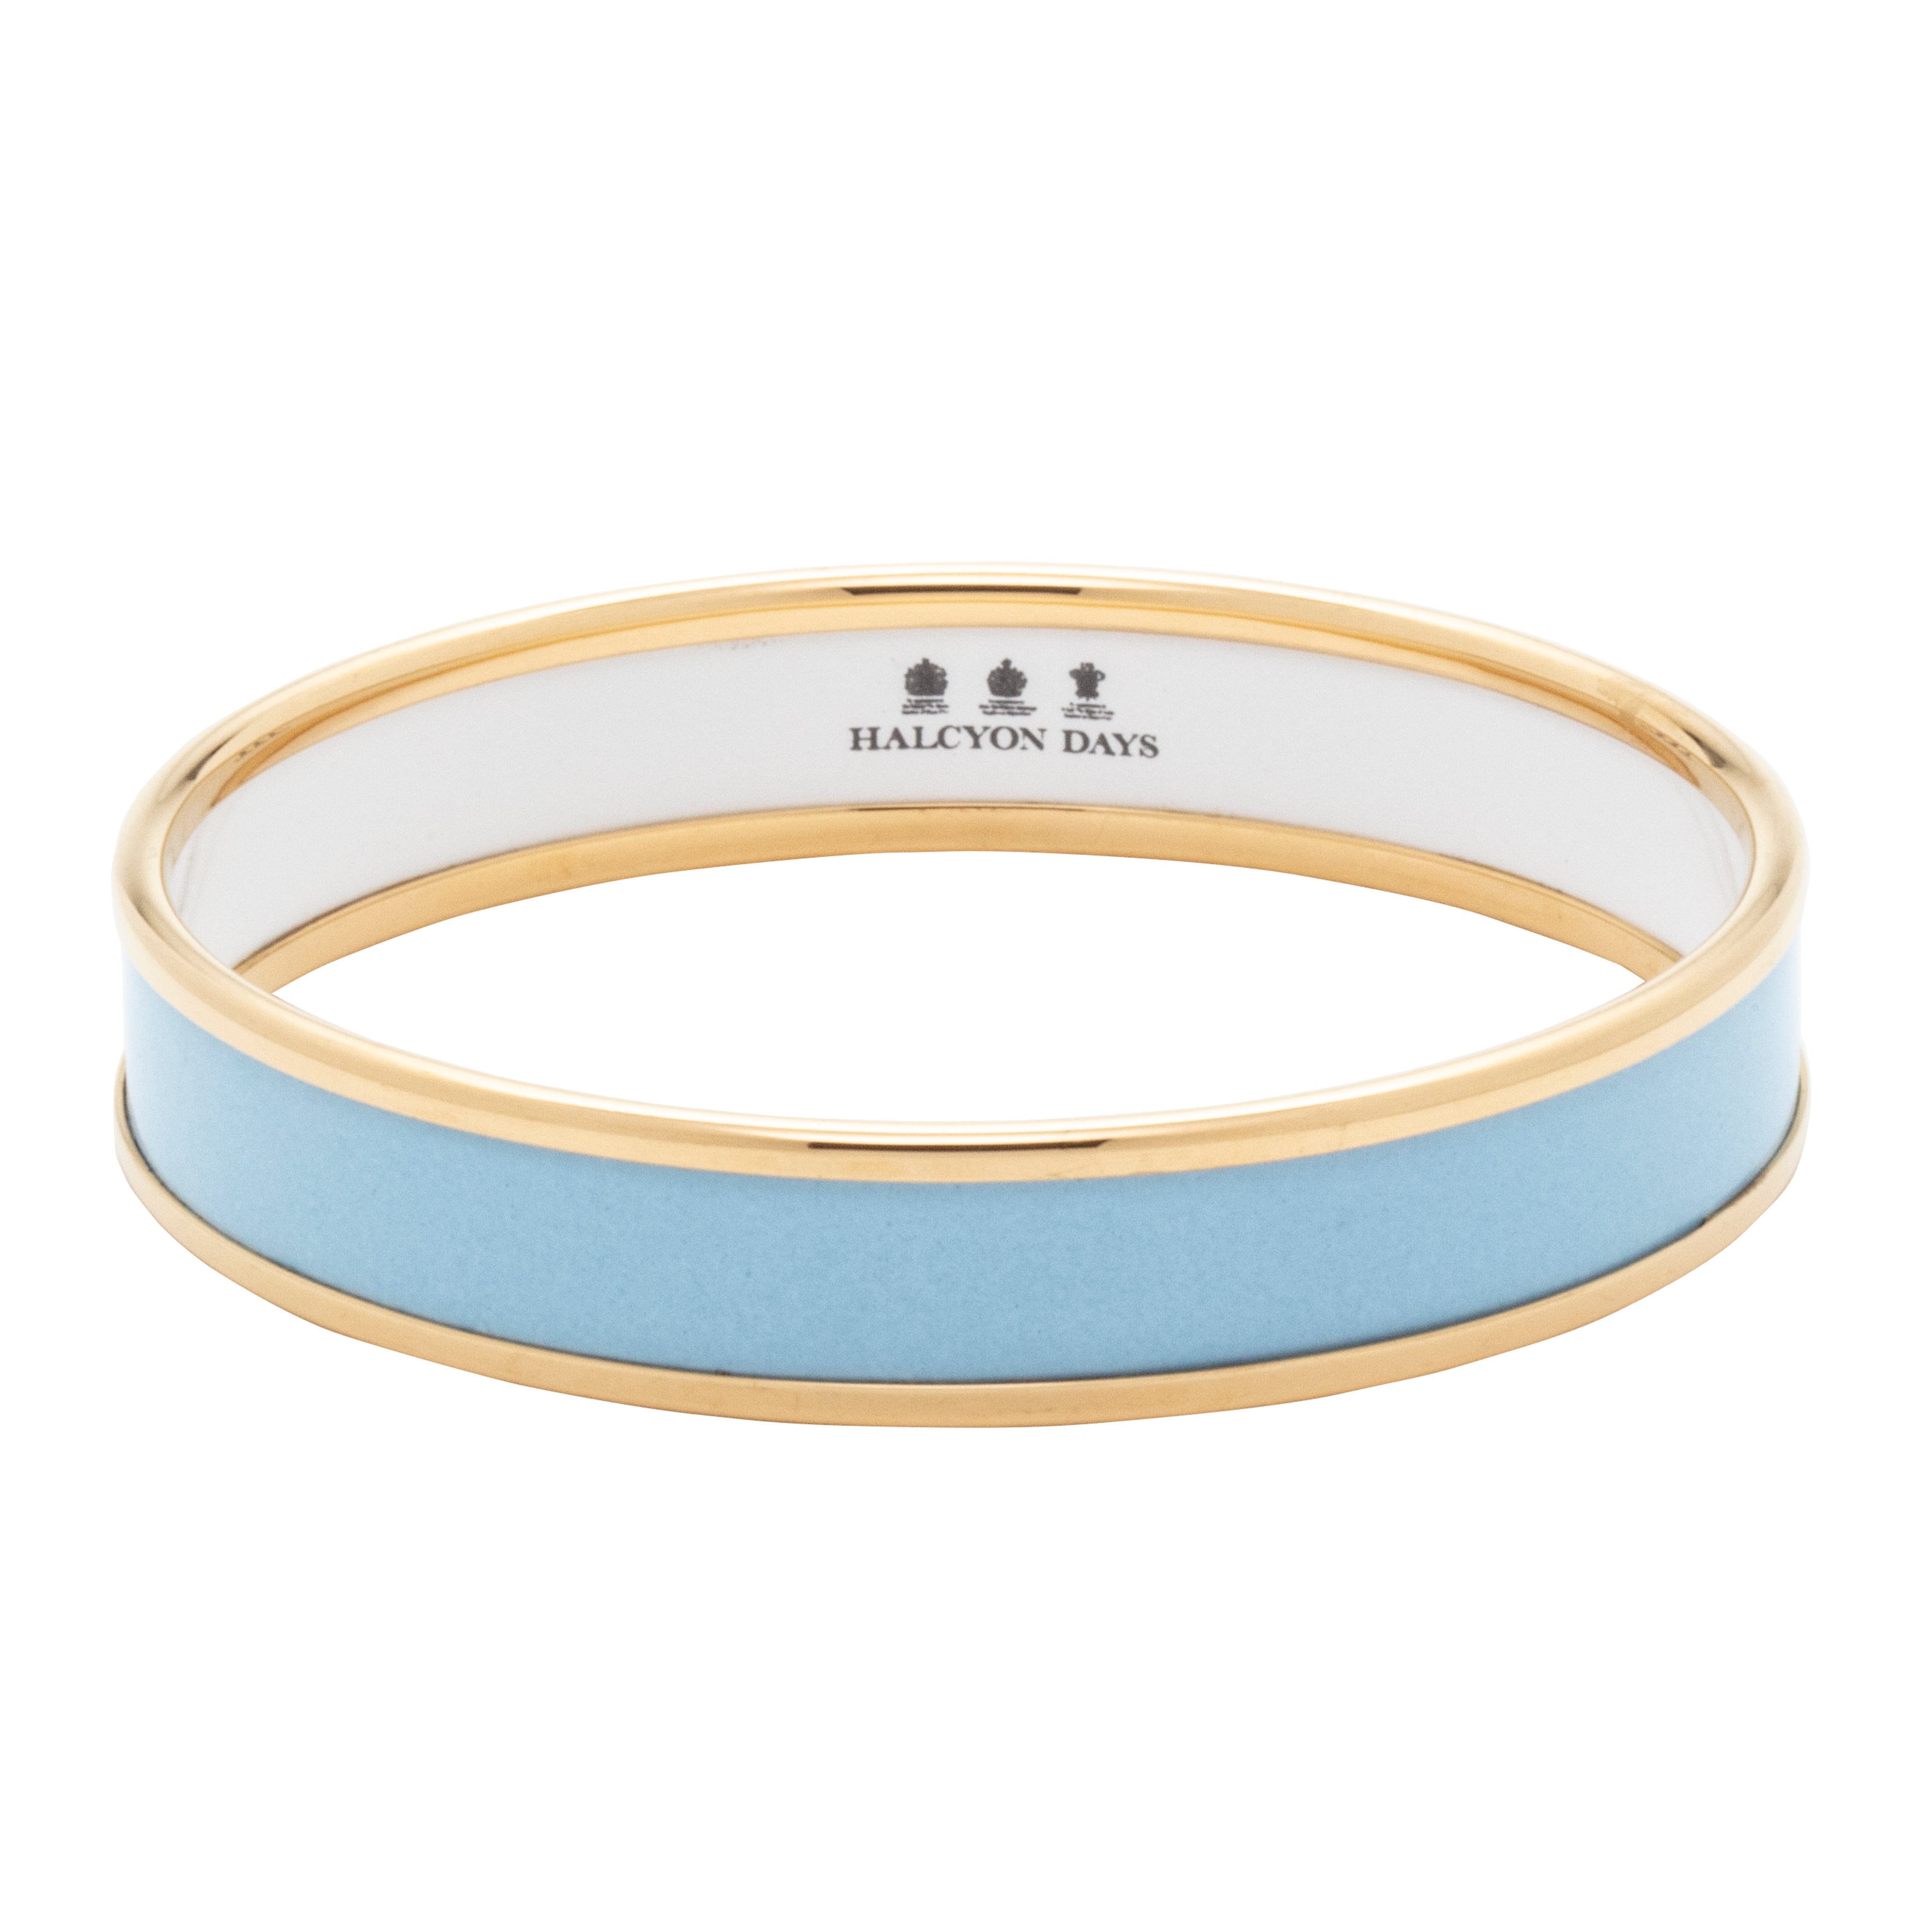 Women's enamel bangle in forget-me-not with gold rims